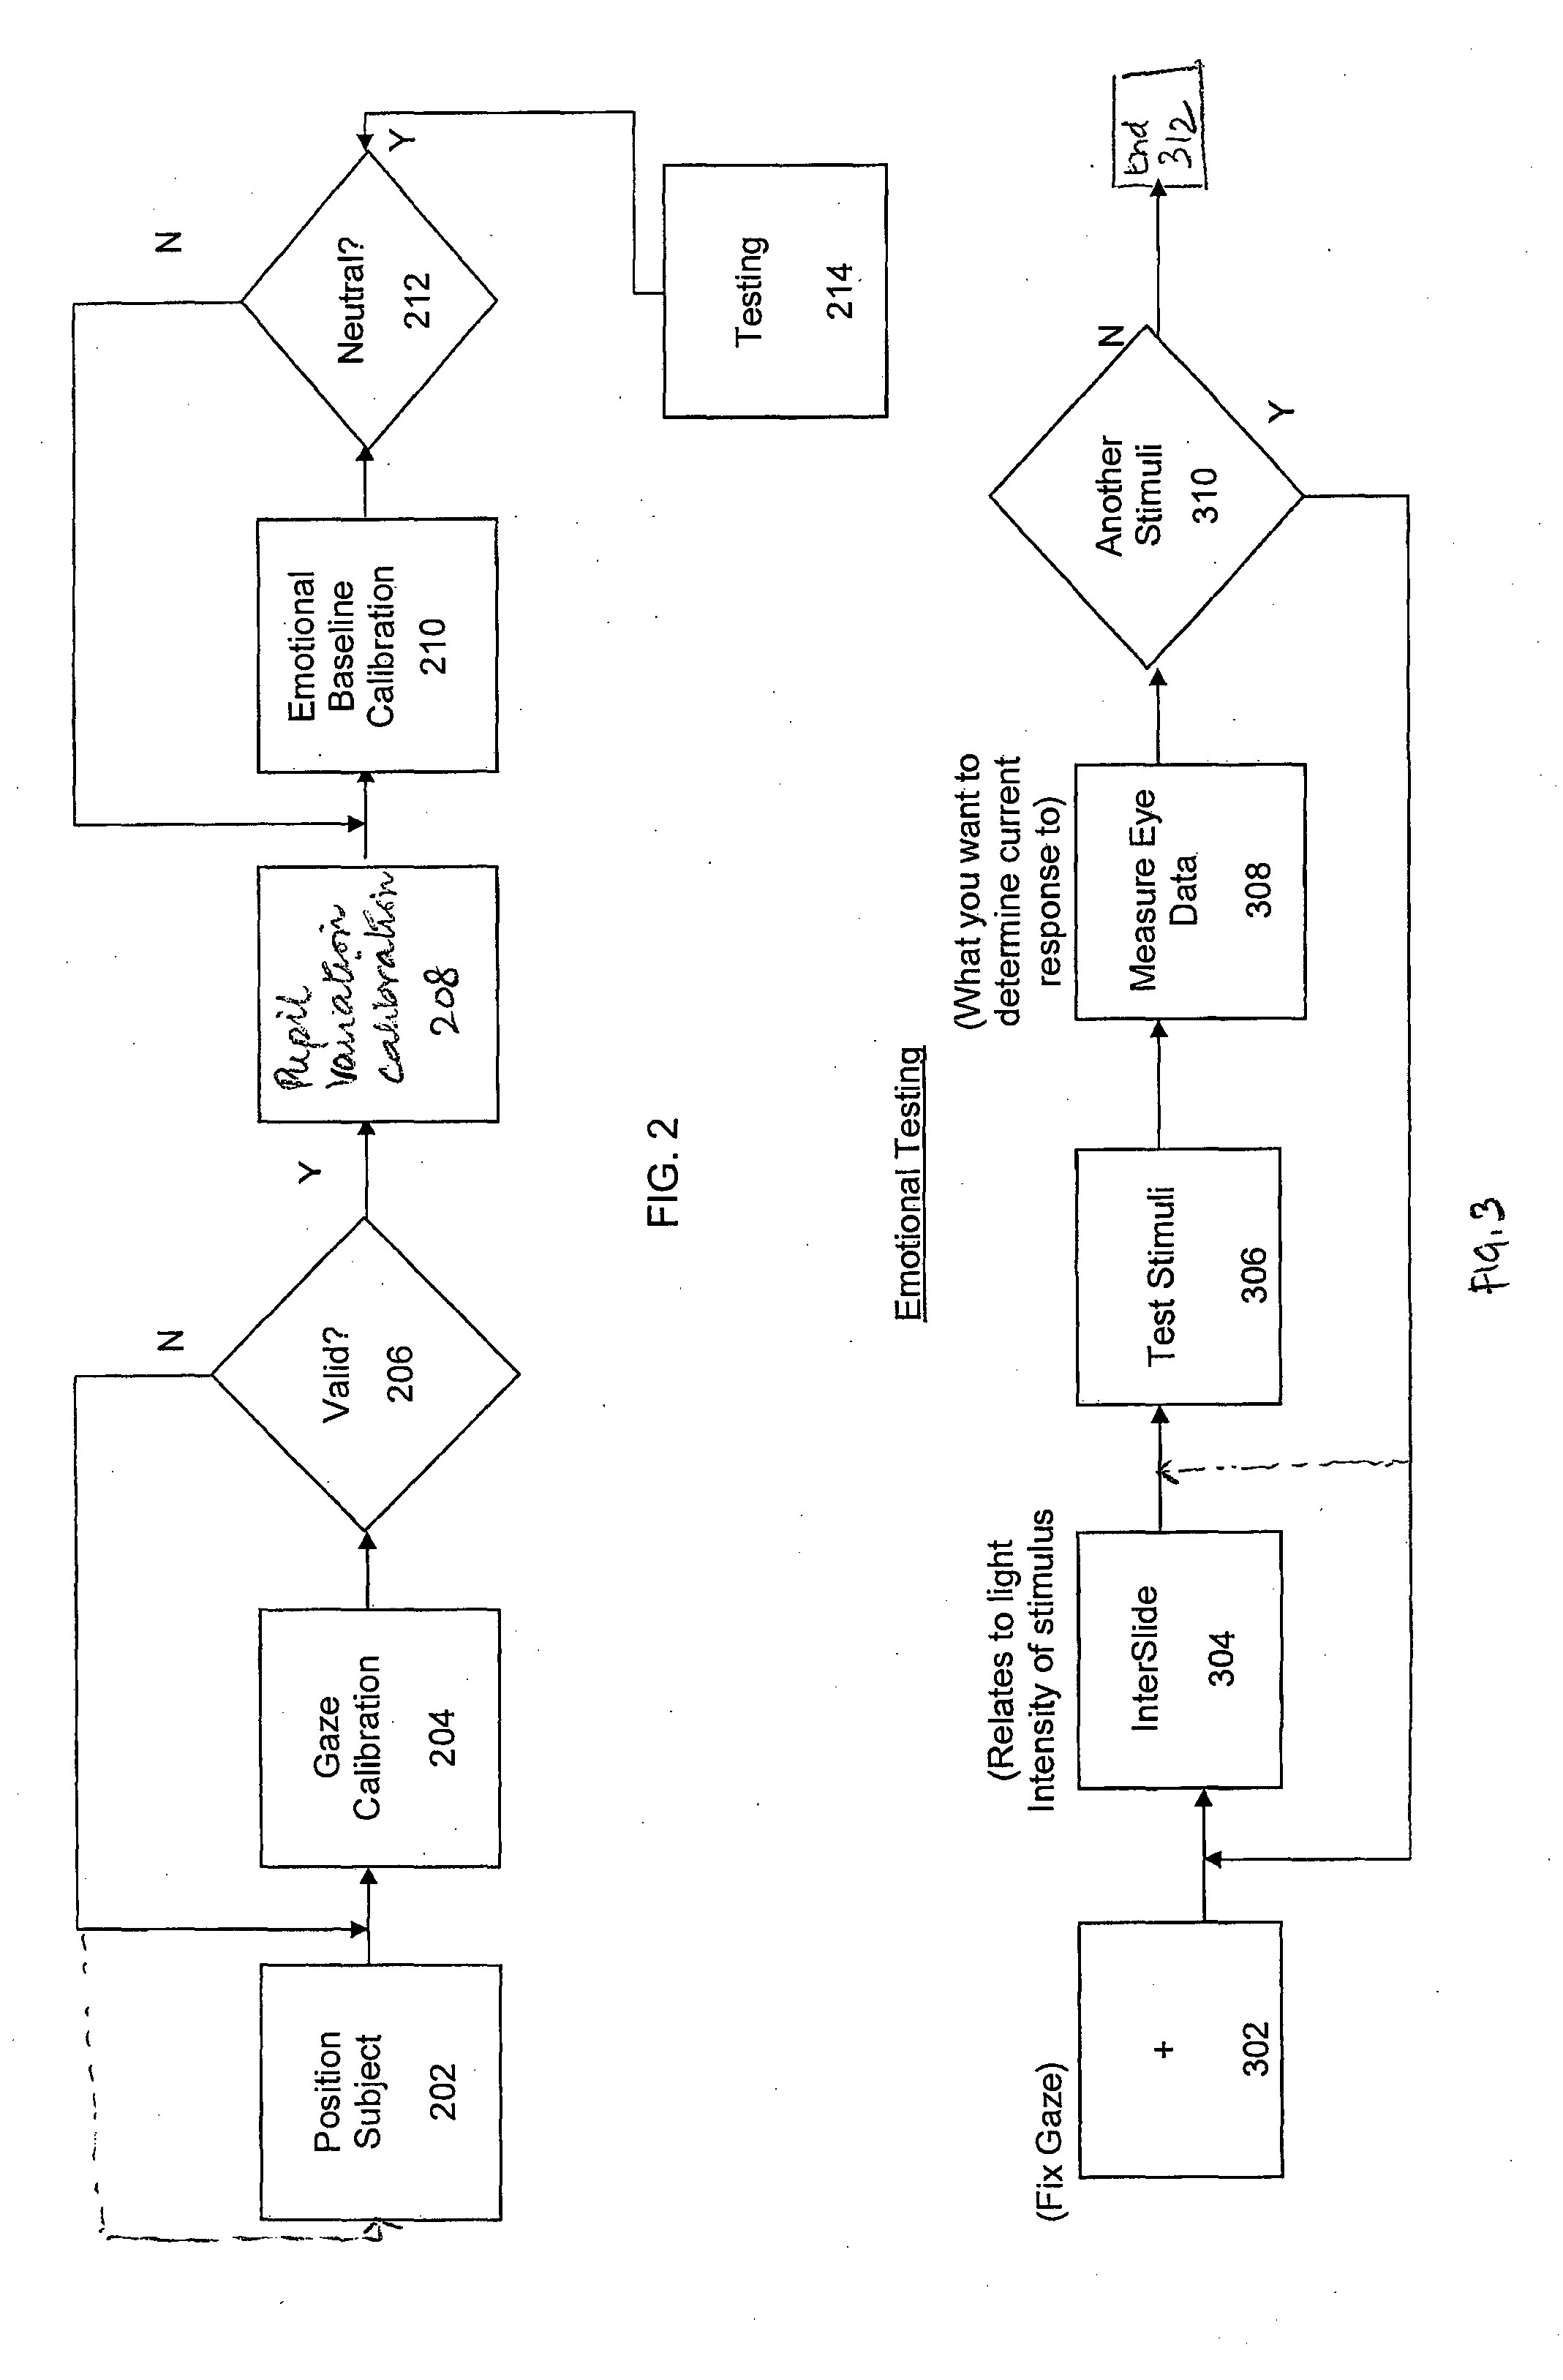 System and method for calibrating and normalizing eye data in emotional testing